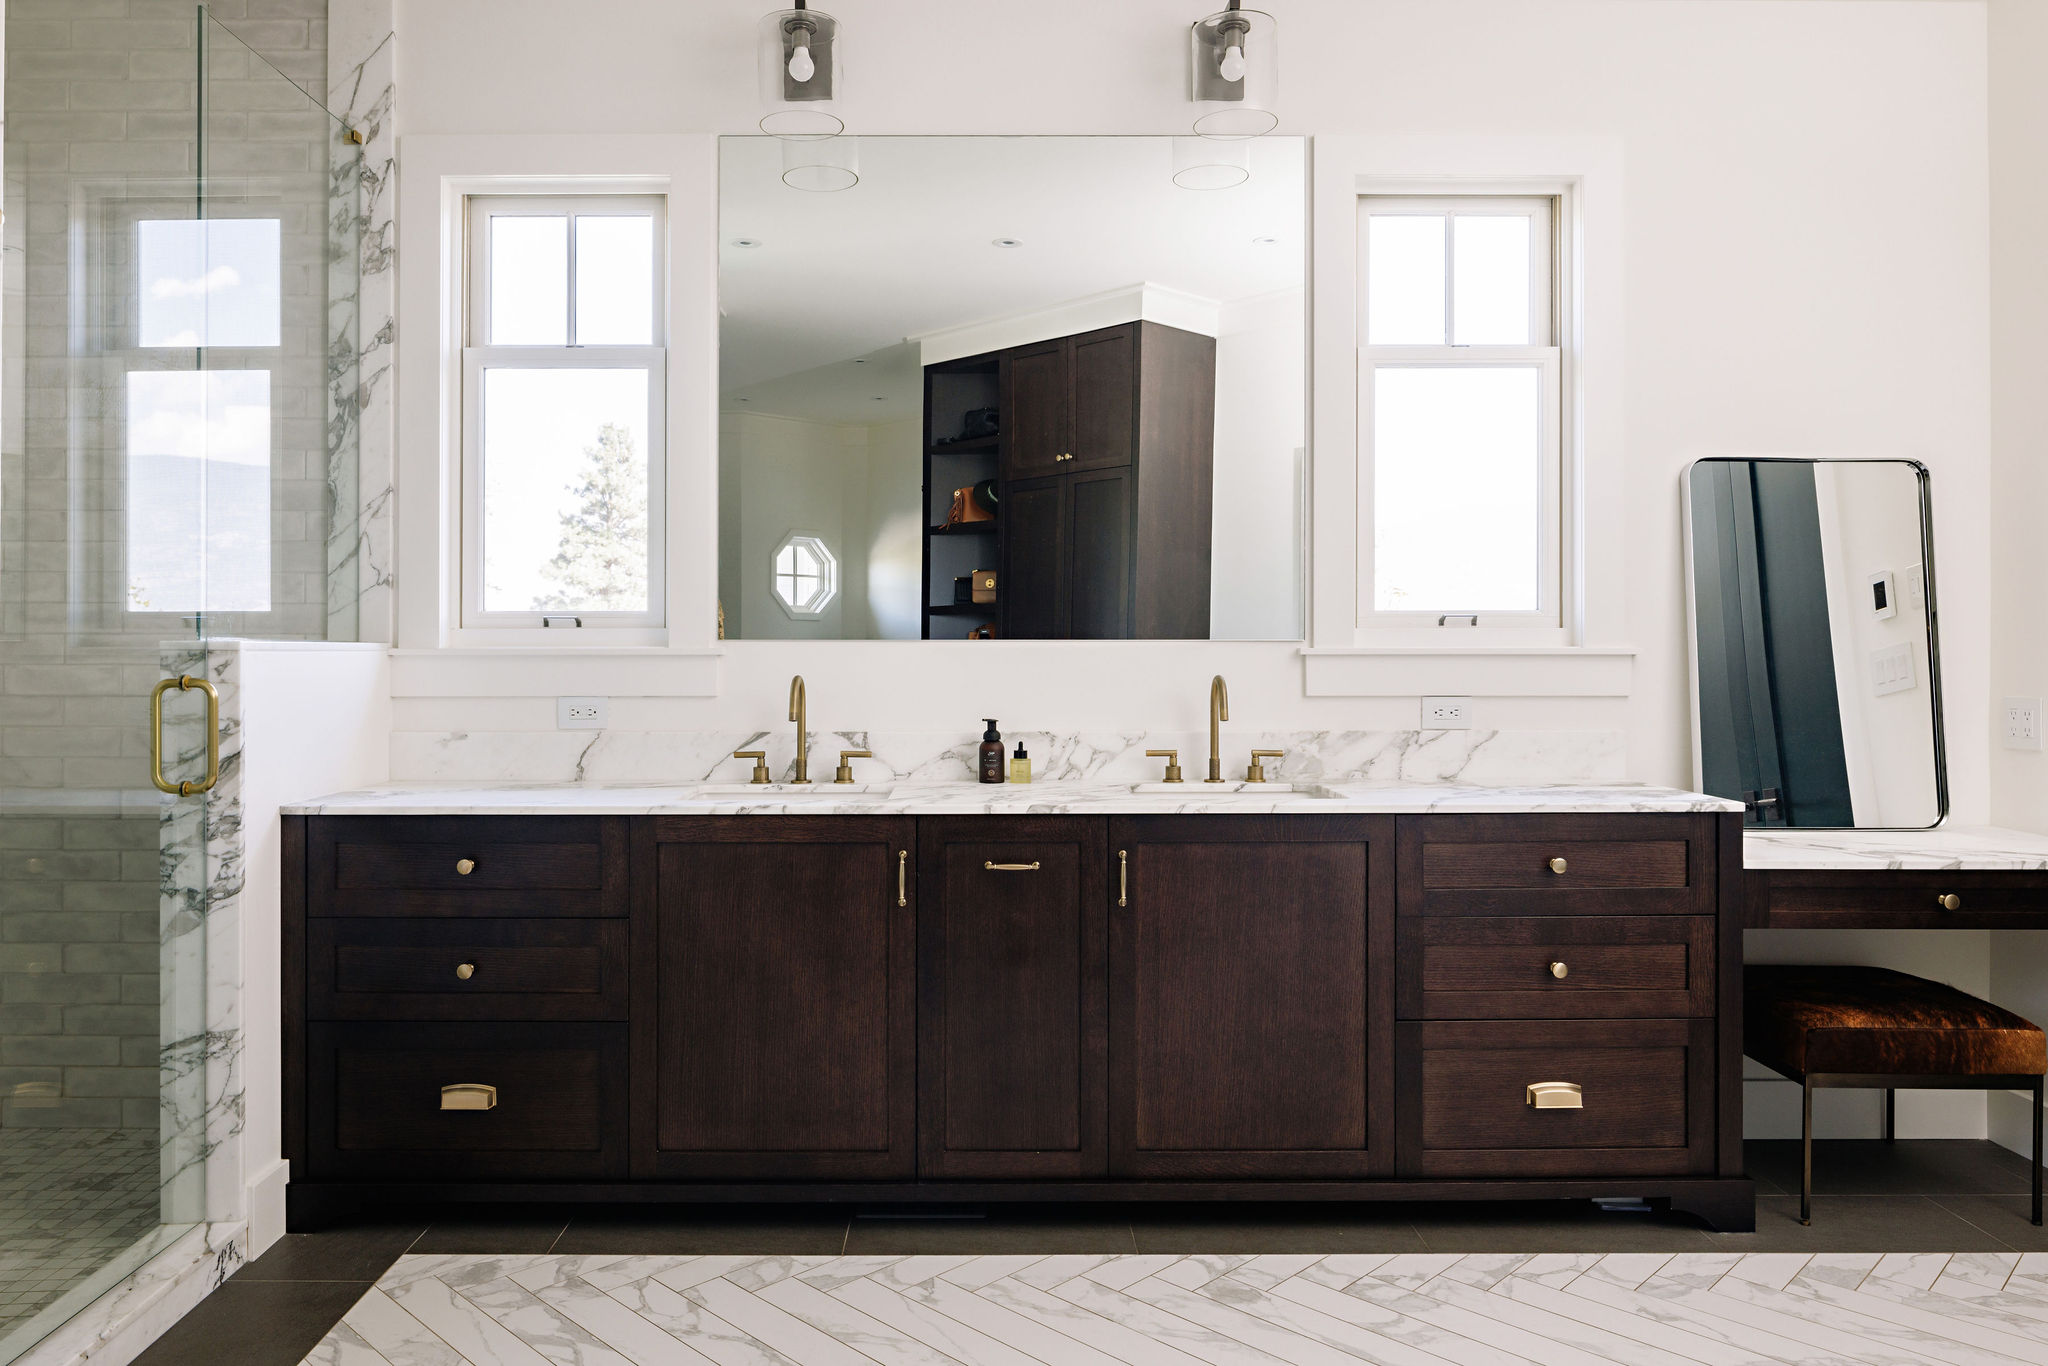 Image of a bathroom vanity with custom dark wood cabinetry, marble countertops and double sinks.